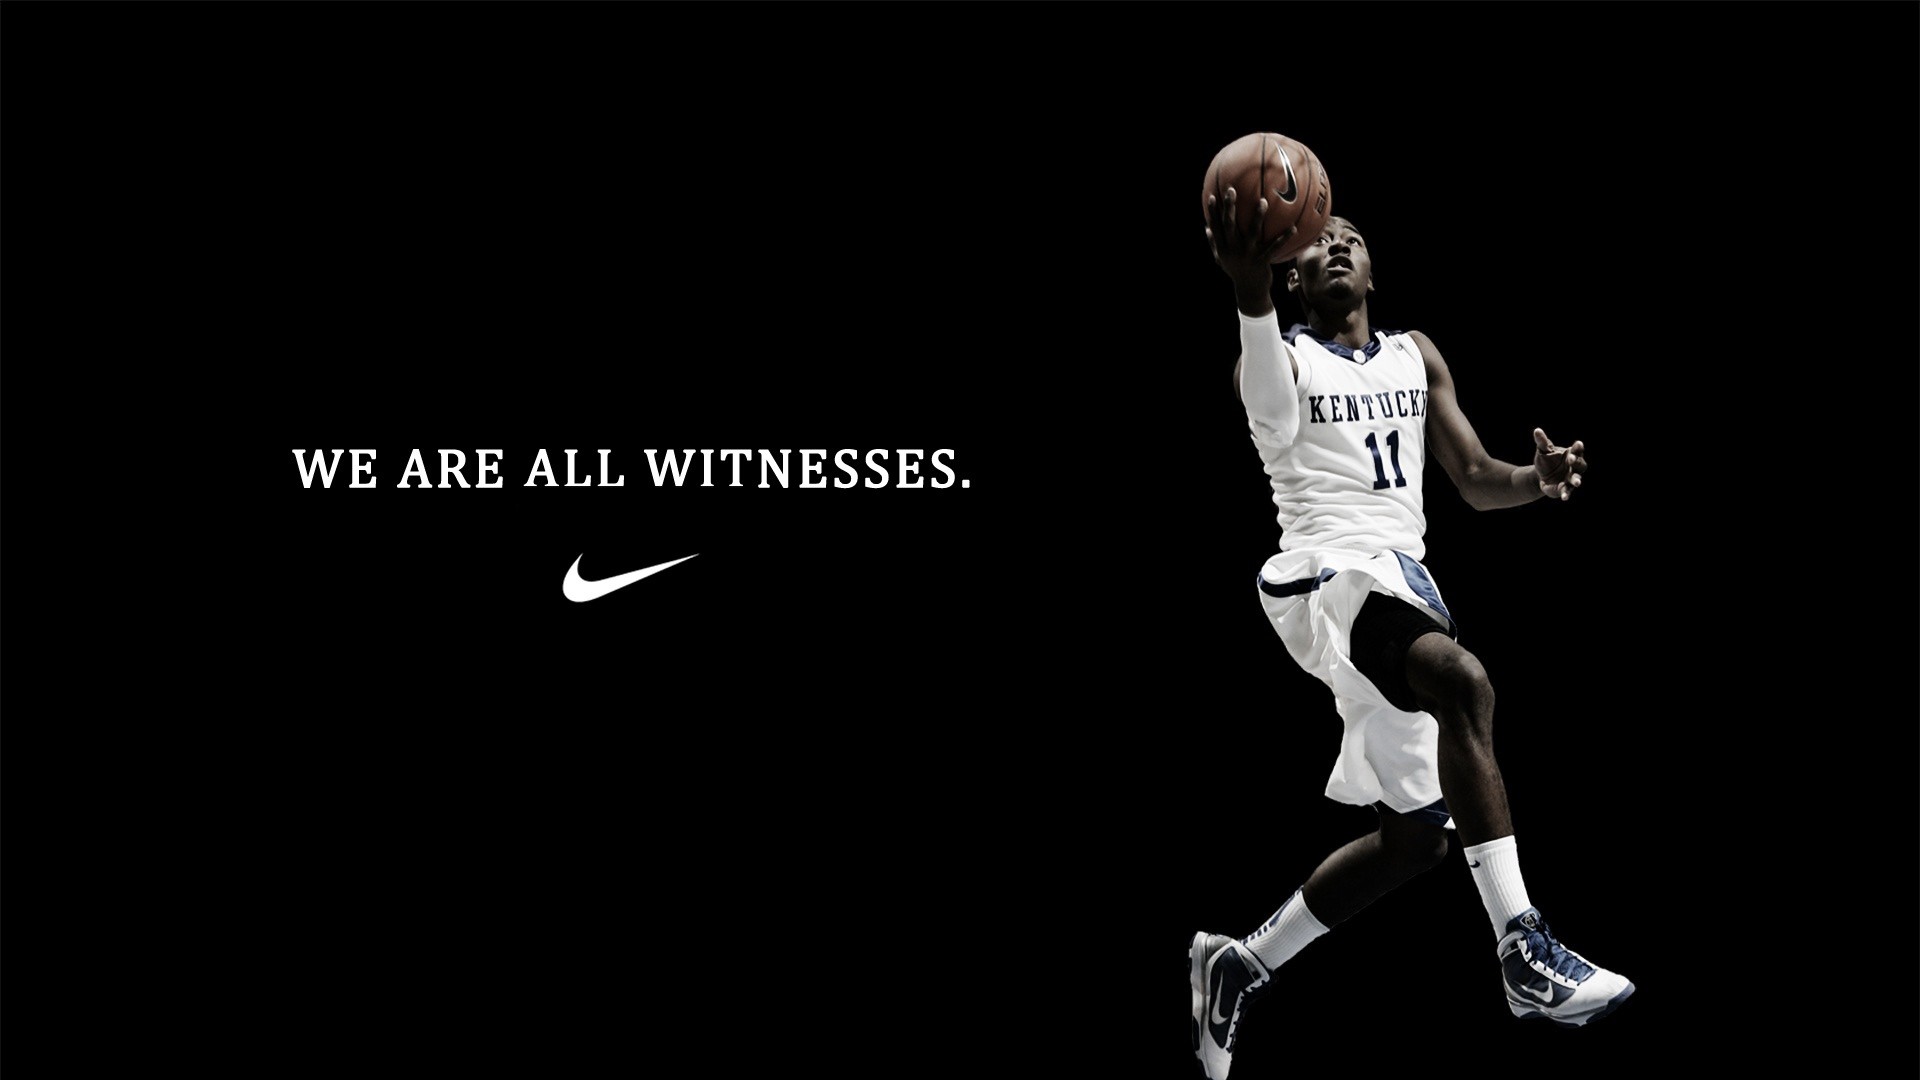 1920x1080 Basketball Live Wallpaeprs Collection 2 Basketball guy form inscription nike  advertizing wallpapers .